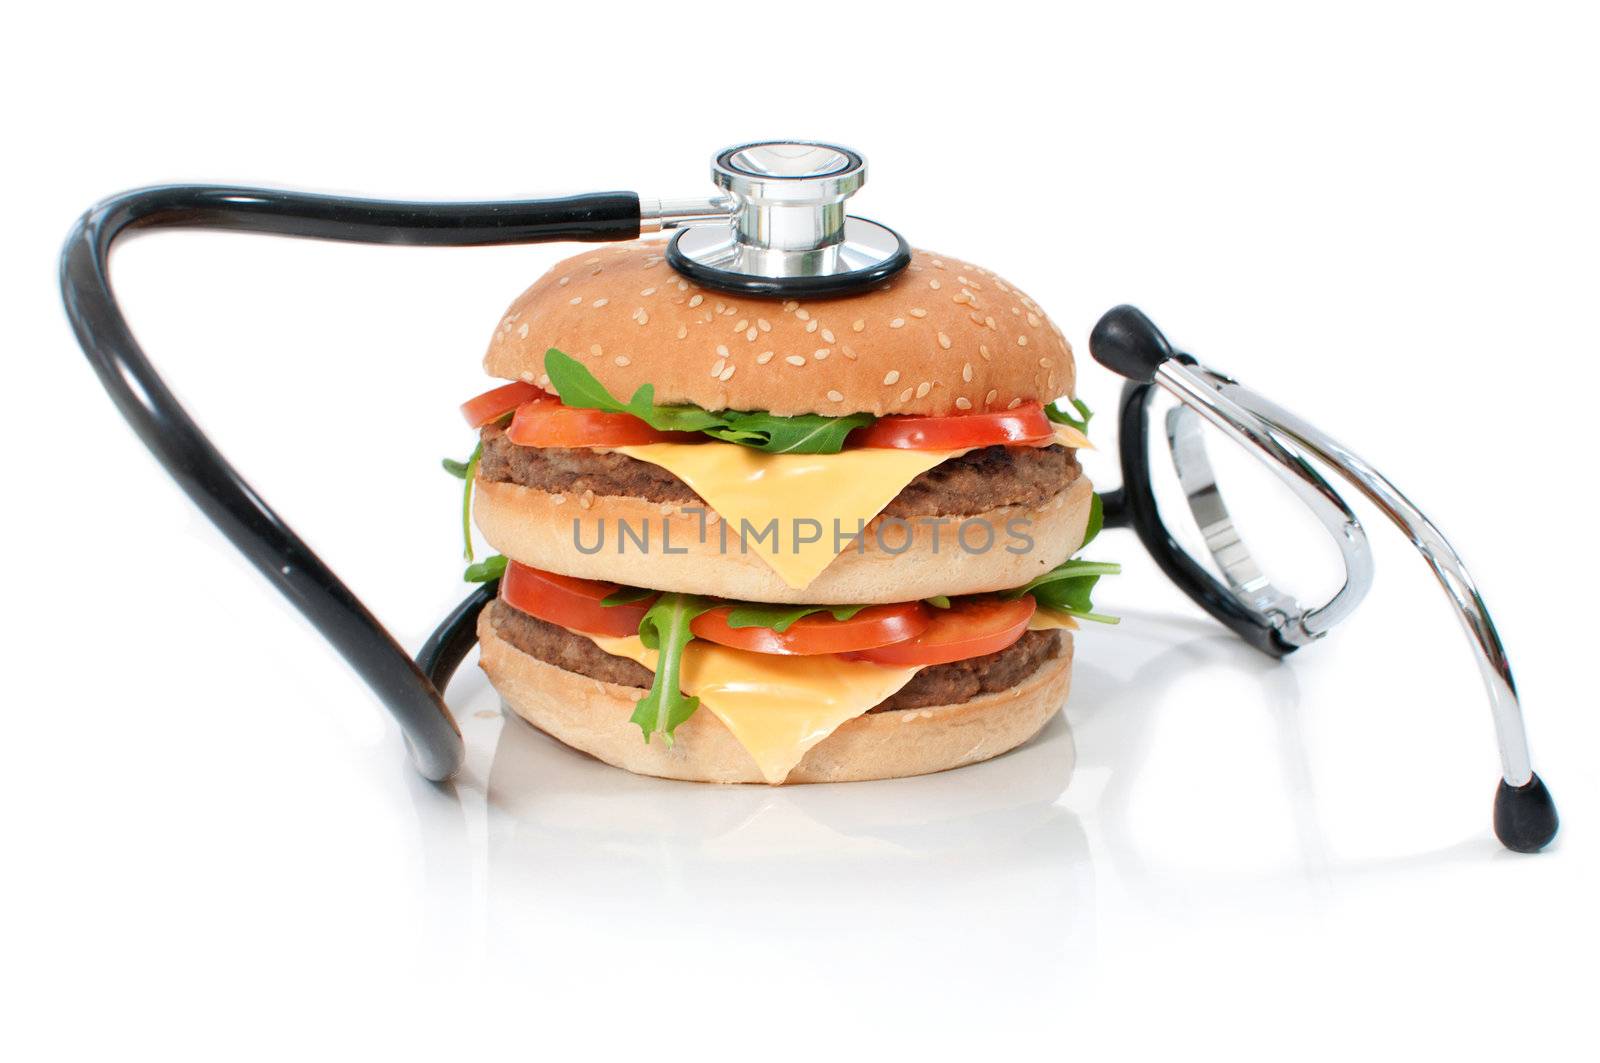 Stethoscope around an unhealthy double cheeseburger  